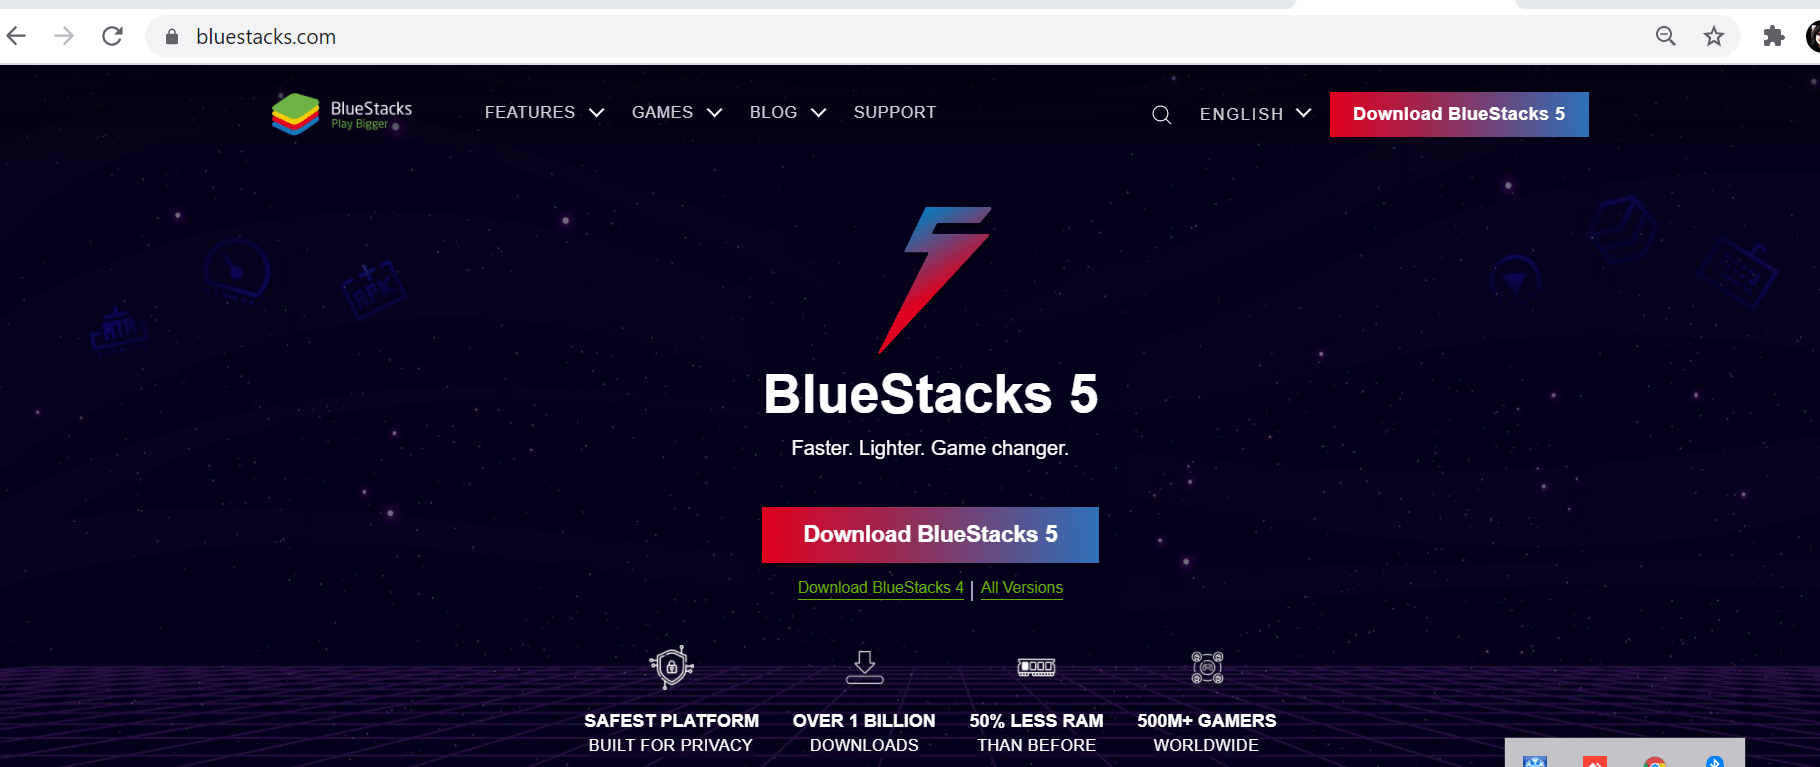 bluestacks2 android emulator for pc and mac play, stream, watch